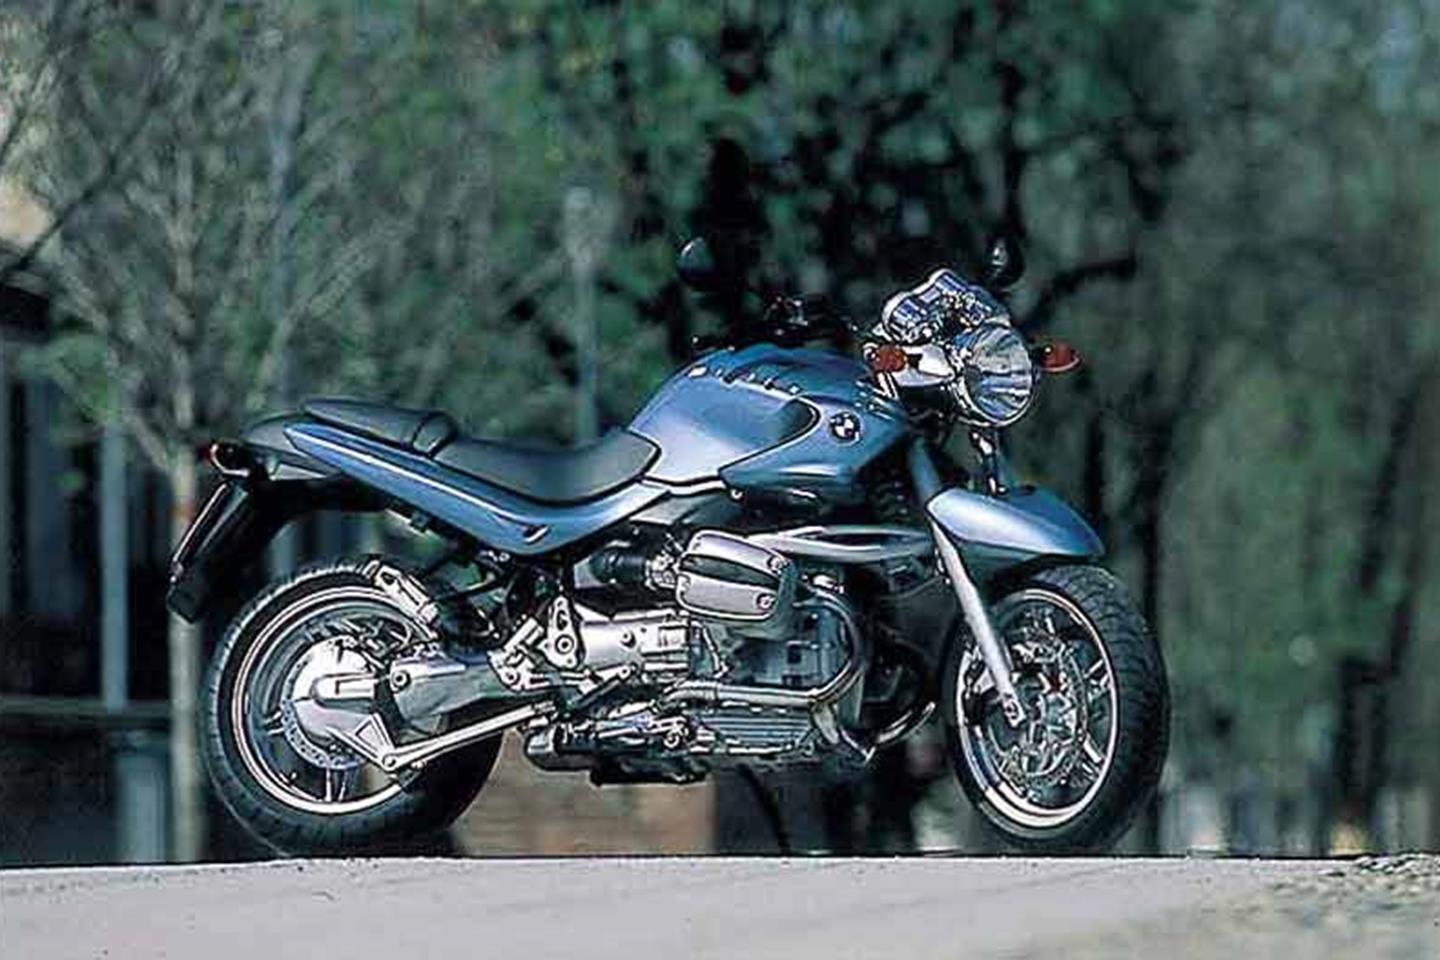 BMW R1150R (2001-2006) Review | Speed